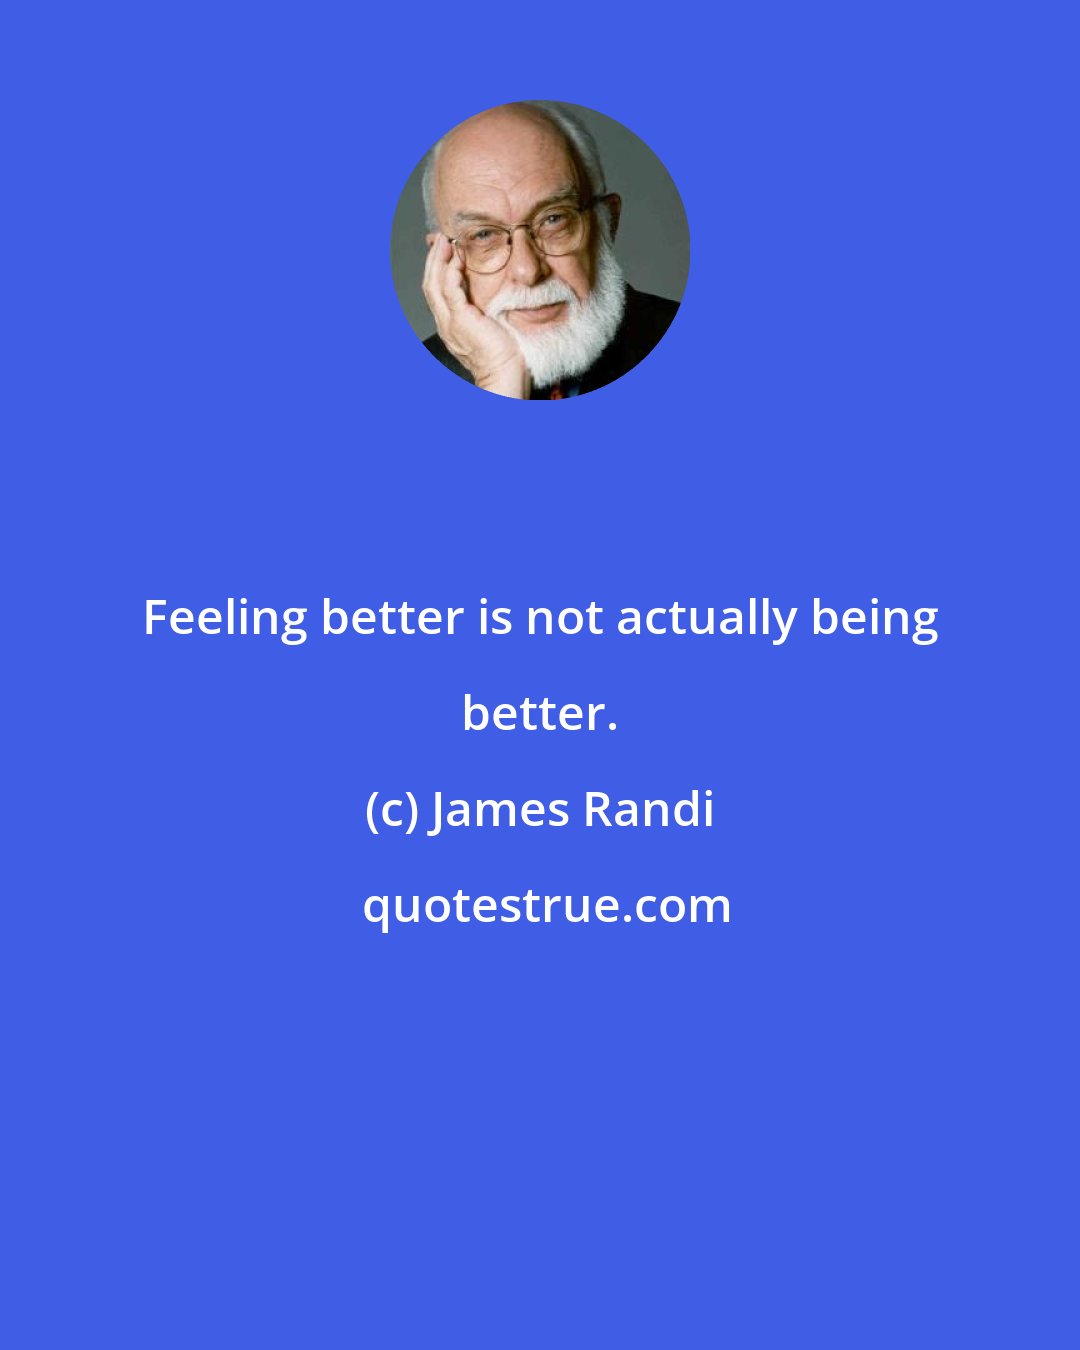 James Randi: Feeling better is not actually being better.